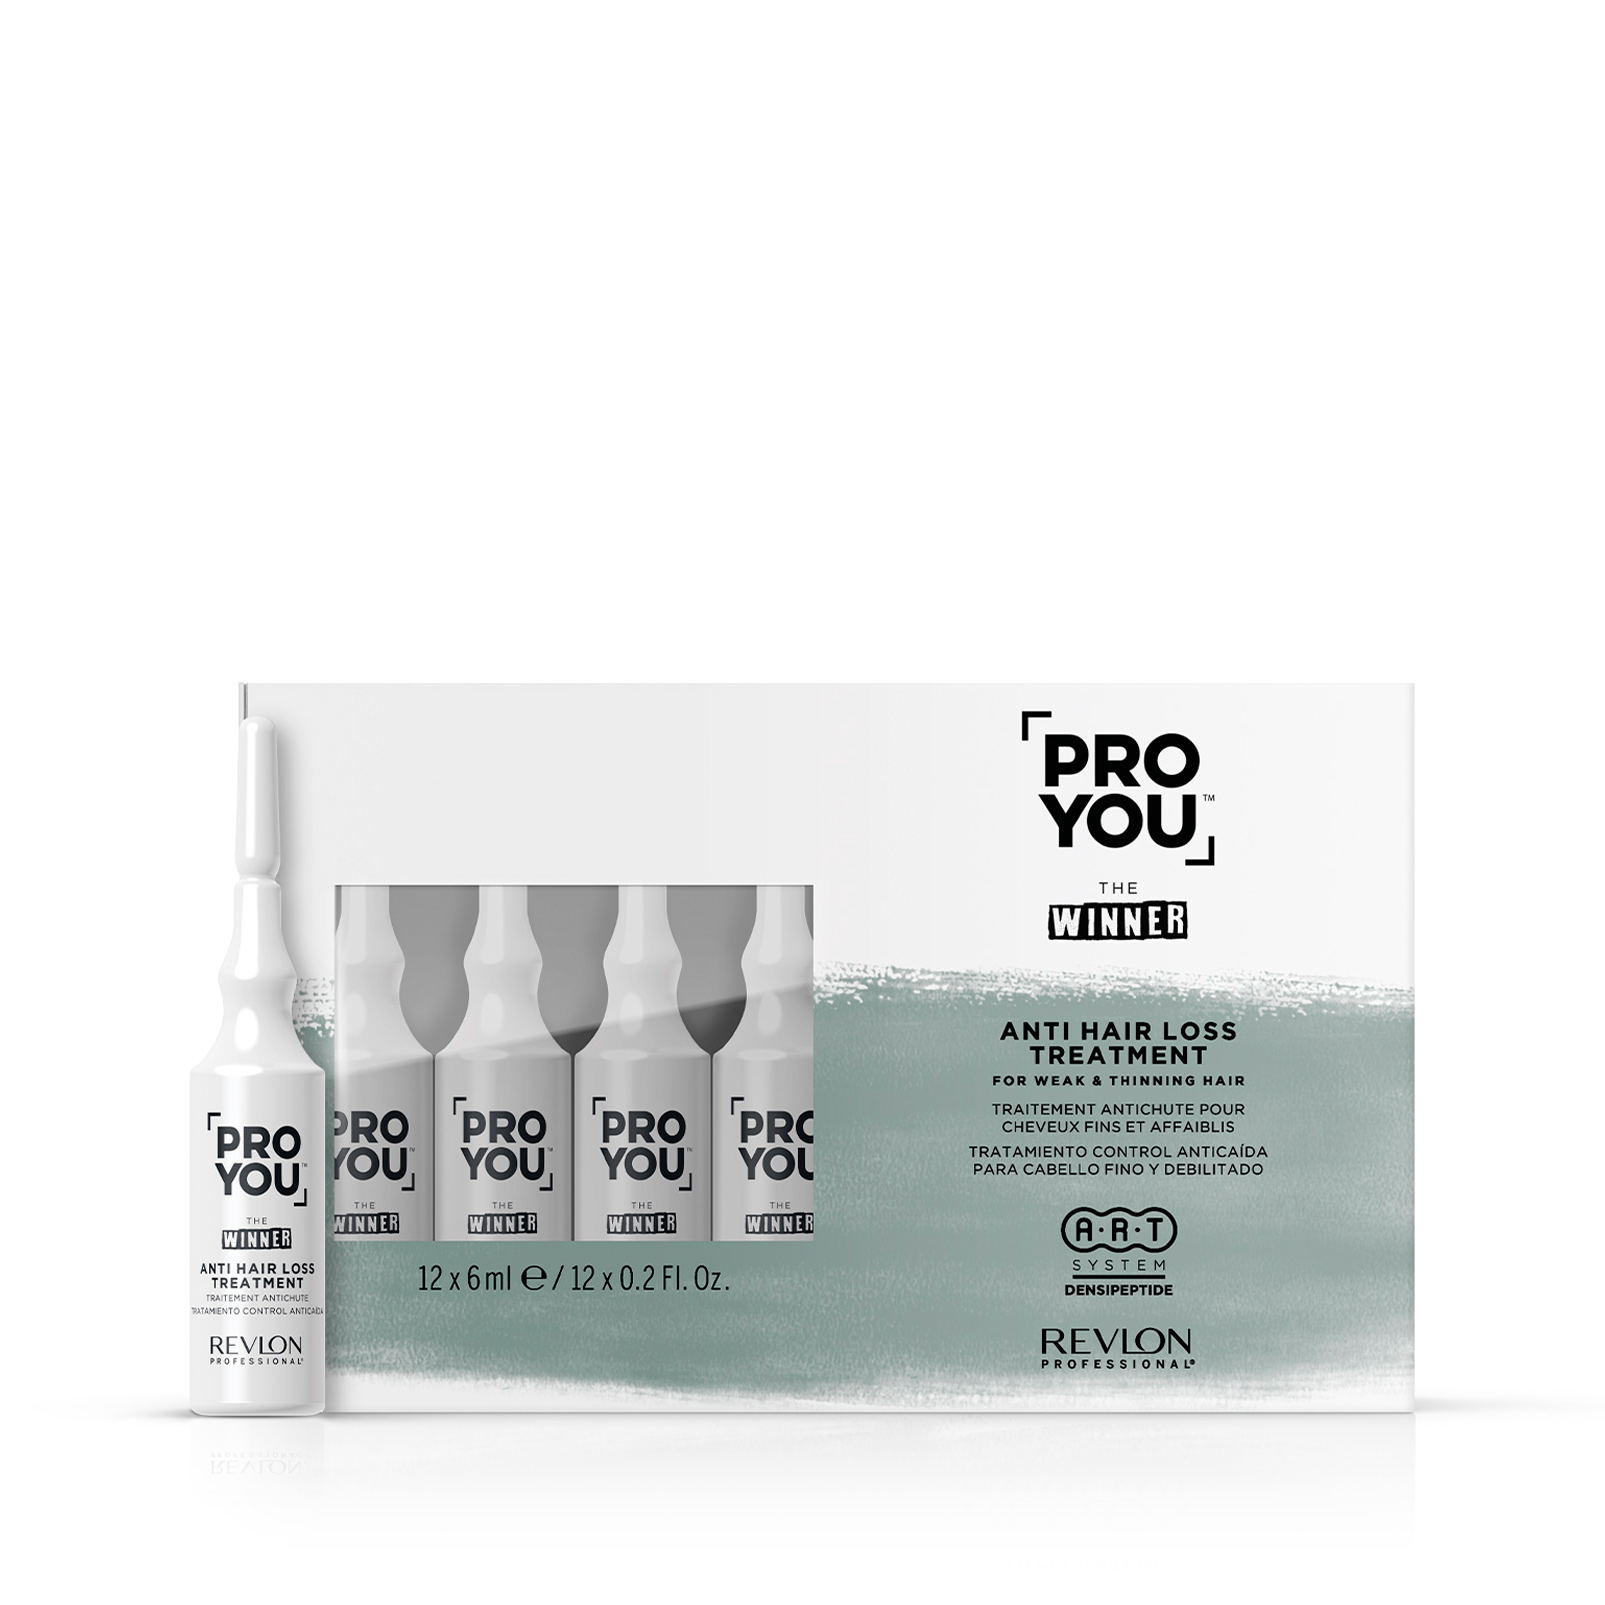 pro-you-care-the winner-anti-hair-loss-treatment